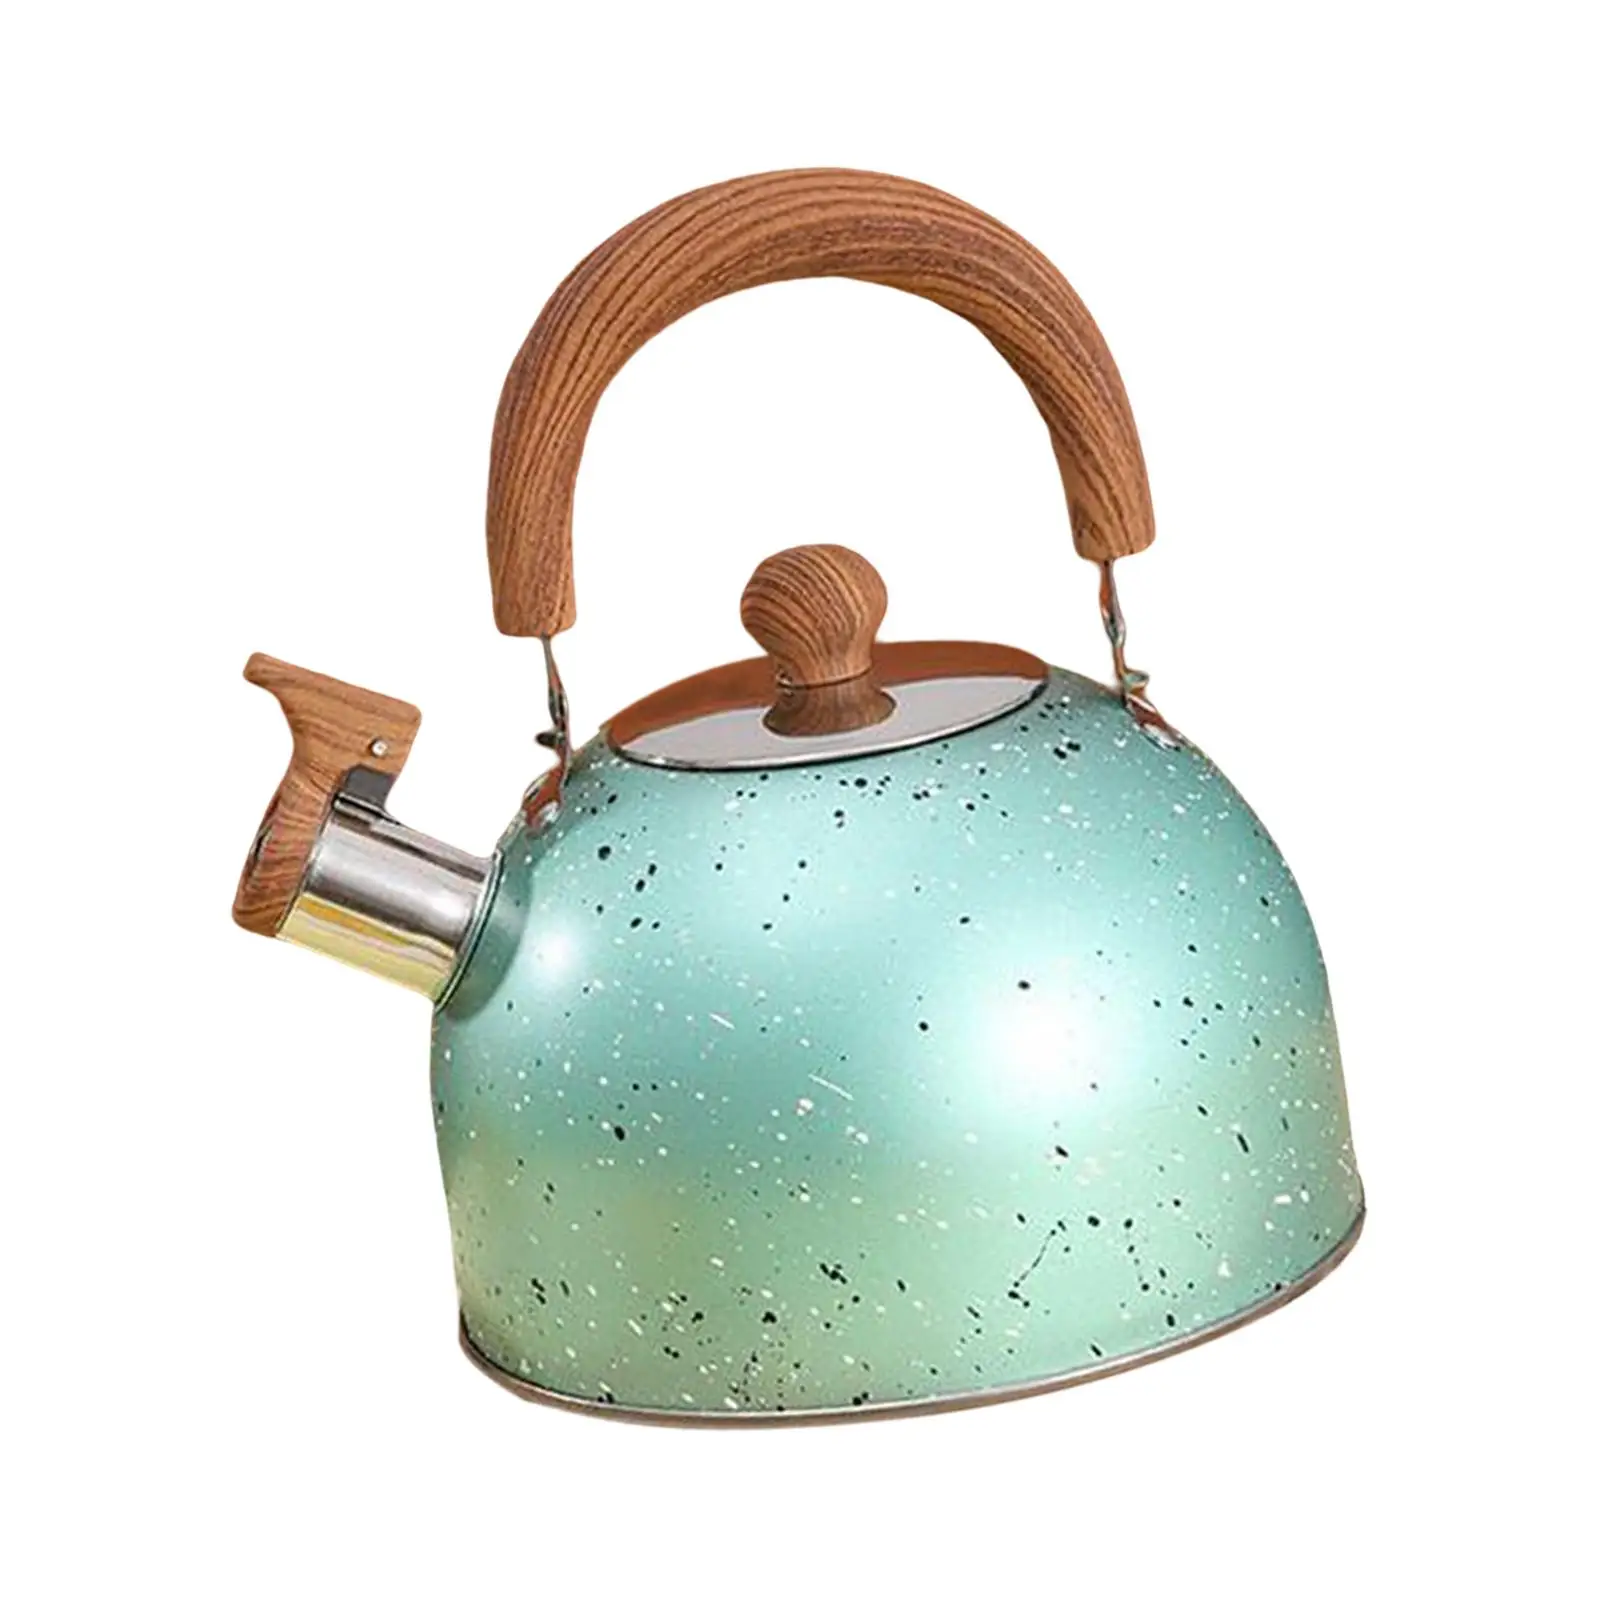 Whistle tea Kettle for Top Stainless Steel for Boiling Water Camping